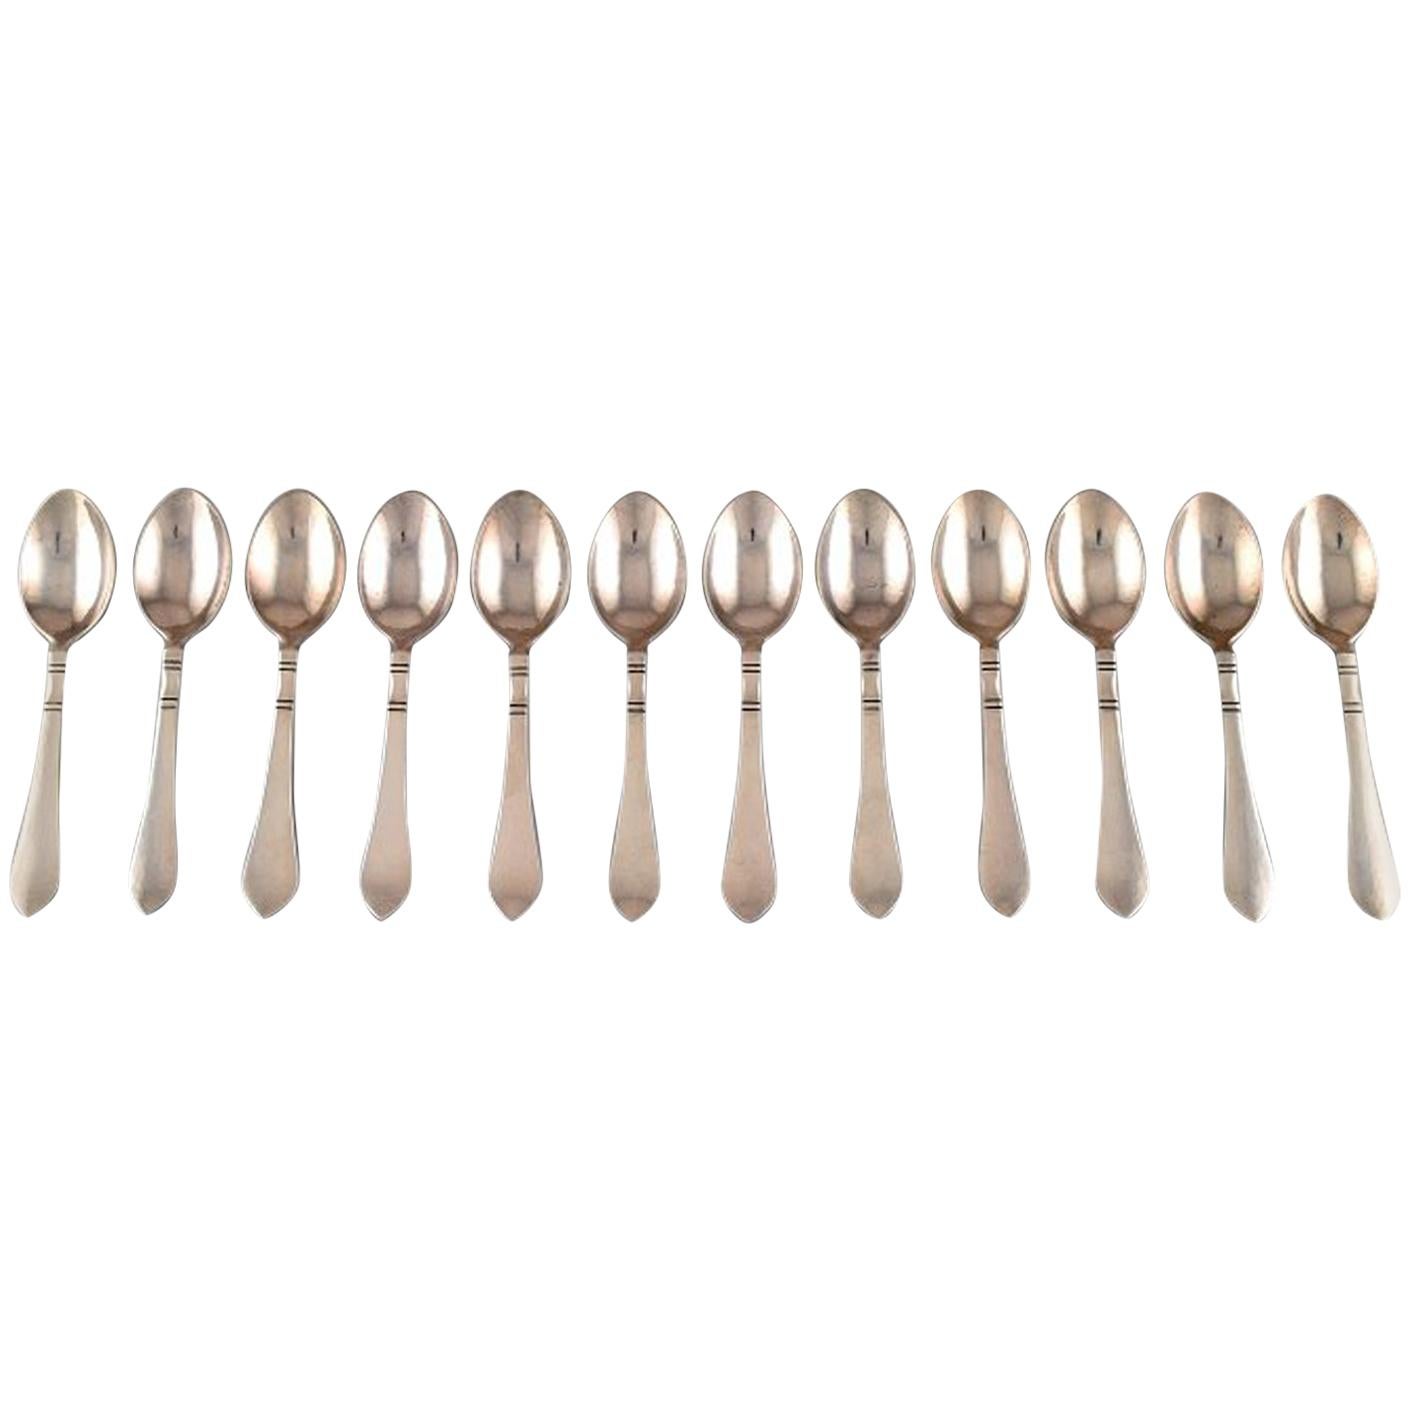 Georg Jensen Continental, 12 Child Spoons/ Large Tea Spoons, Silver Cutlery